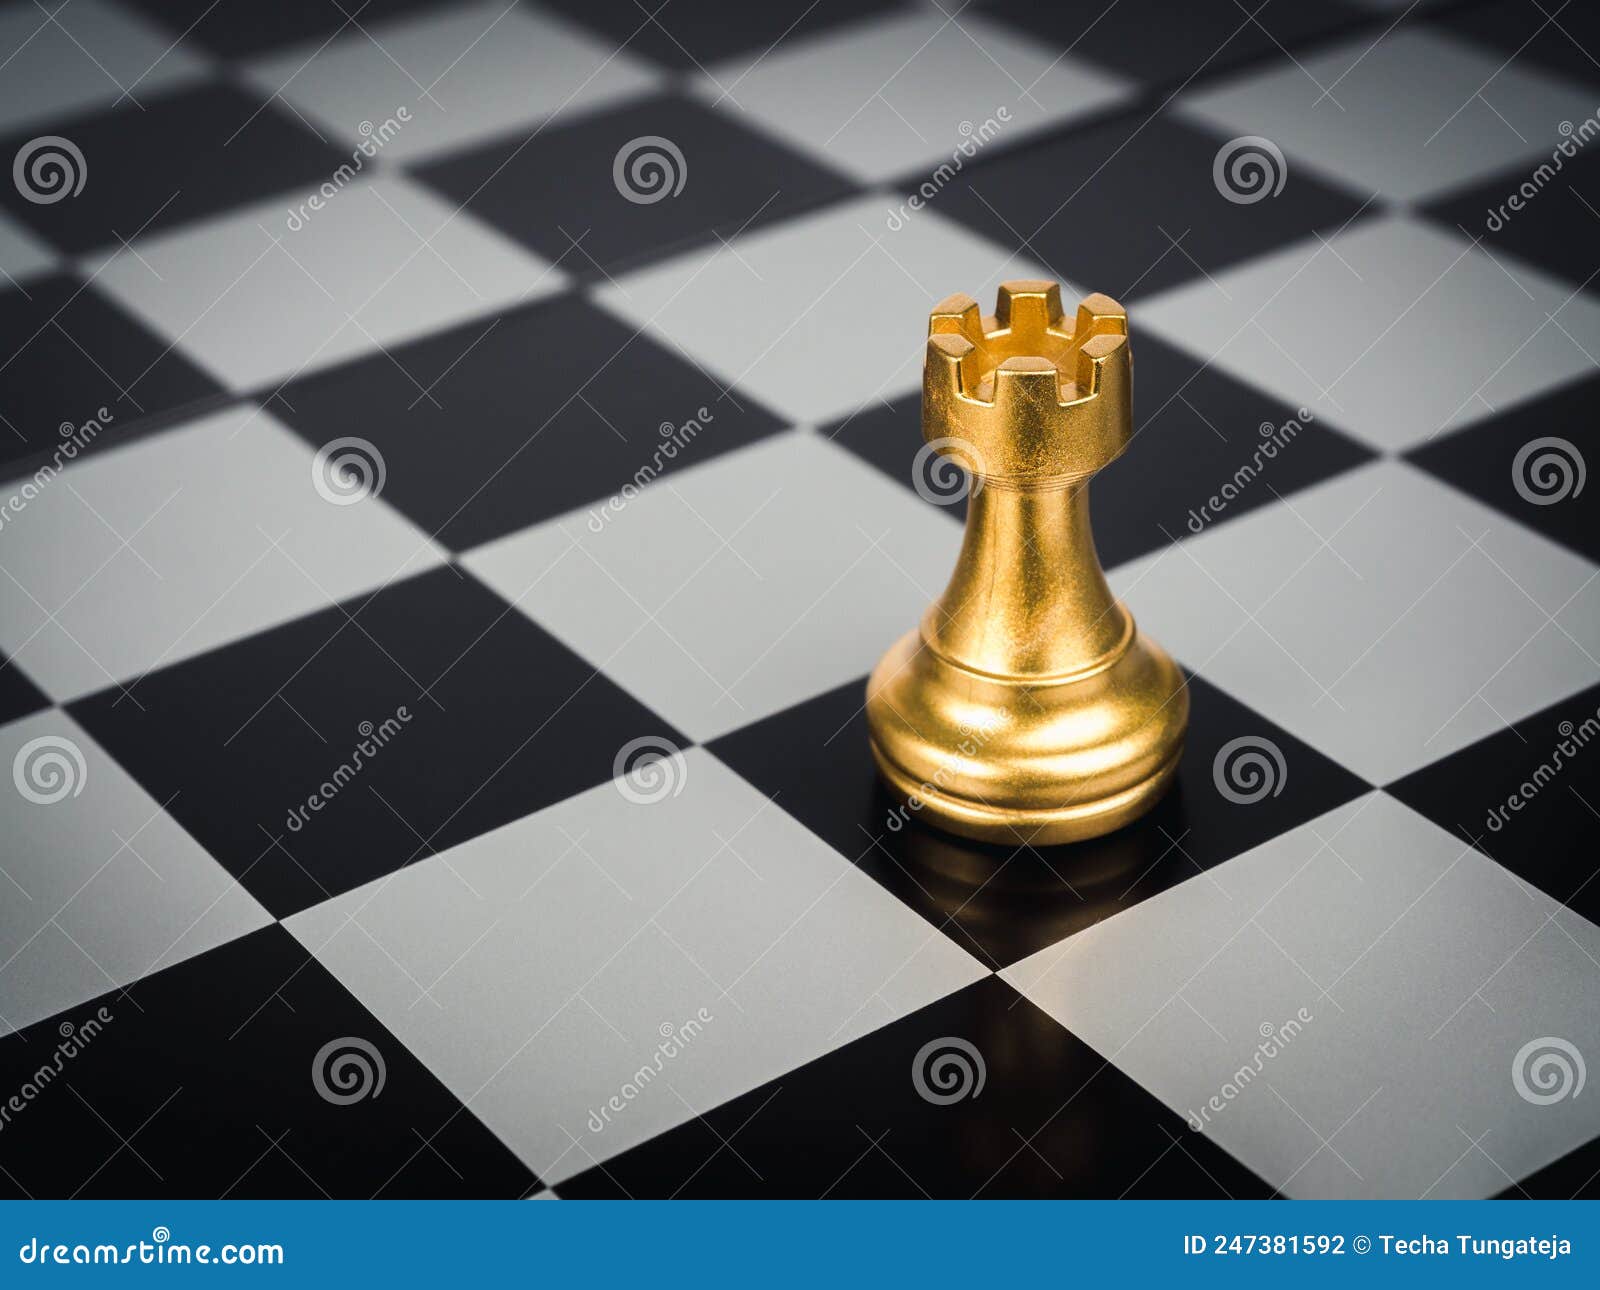 Sicilian defense in chess stock image. Image of rook - 58943903